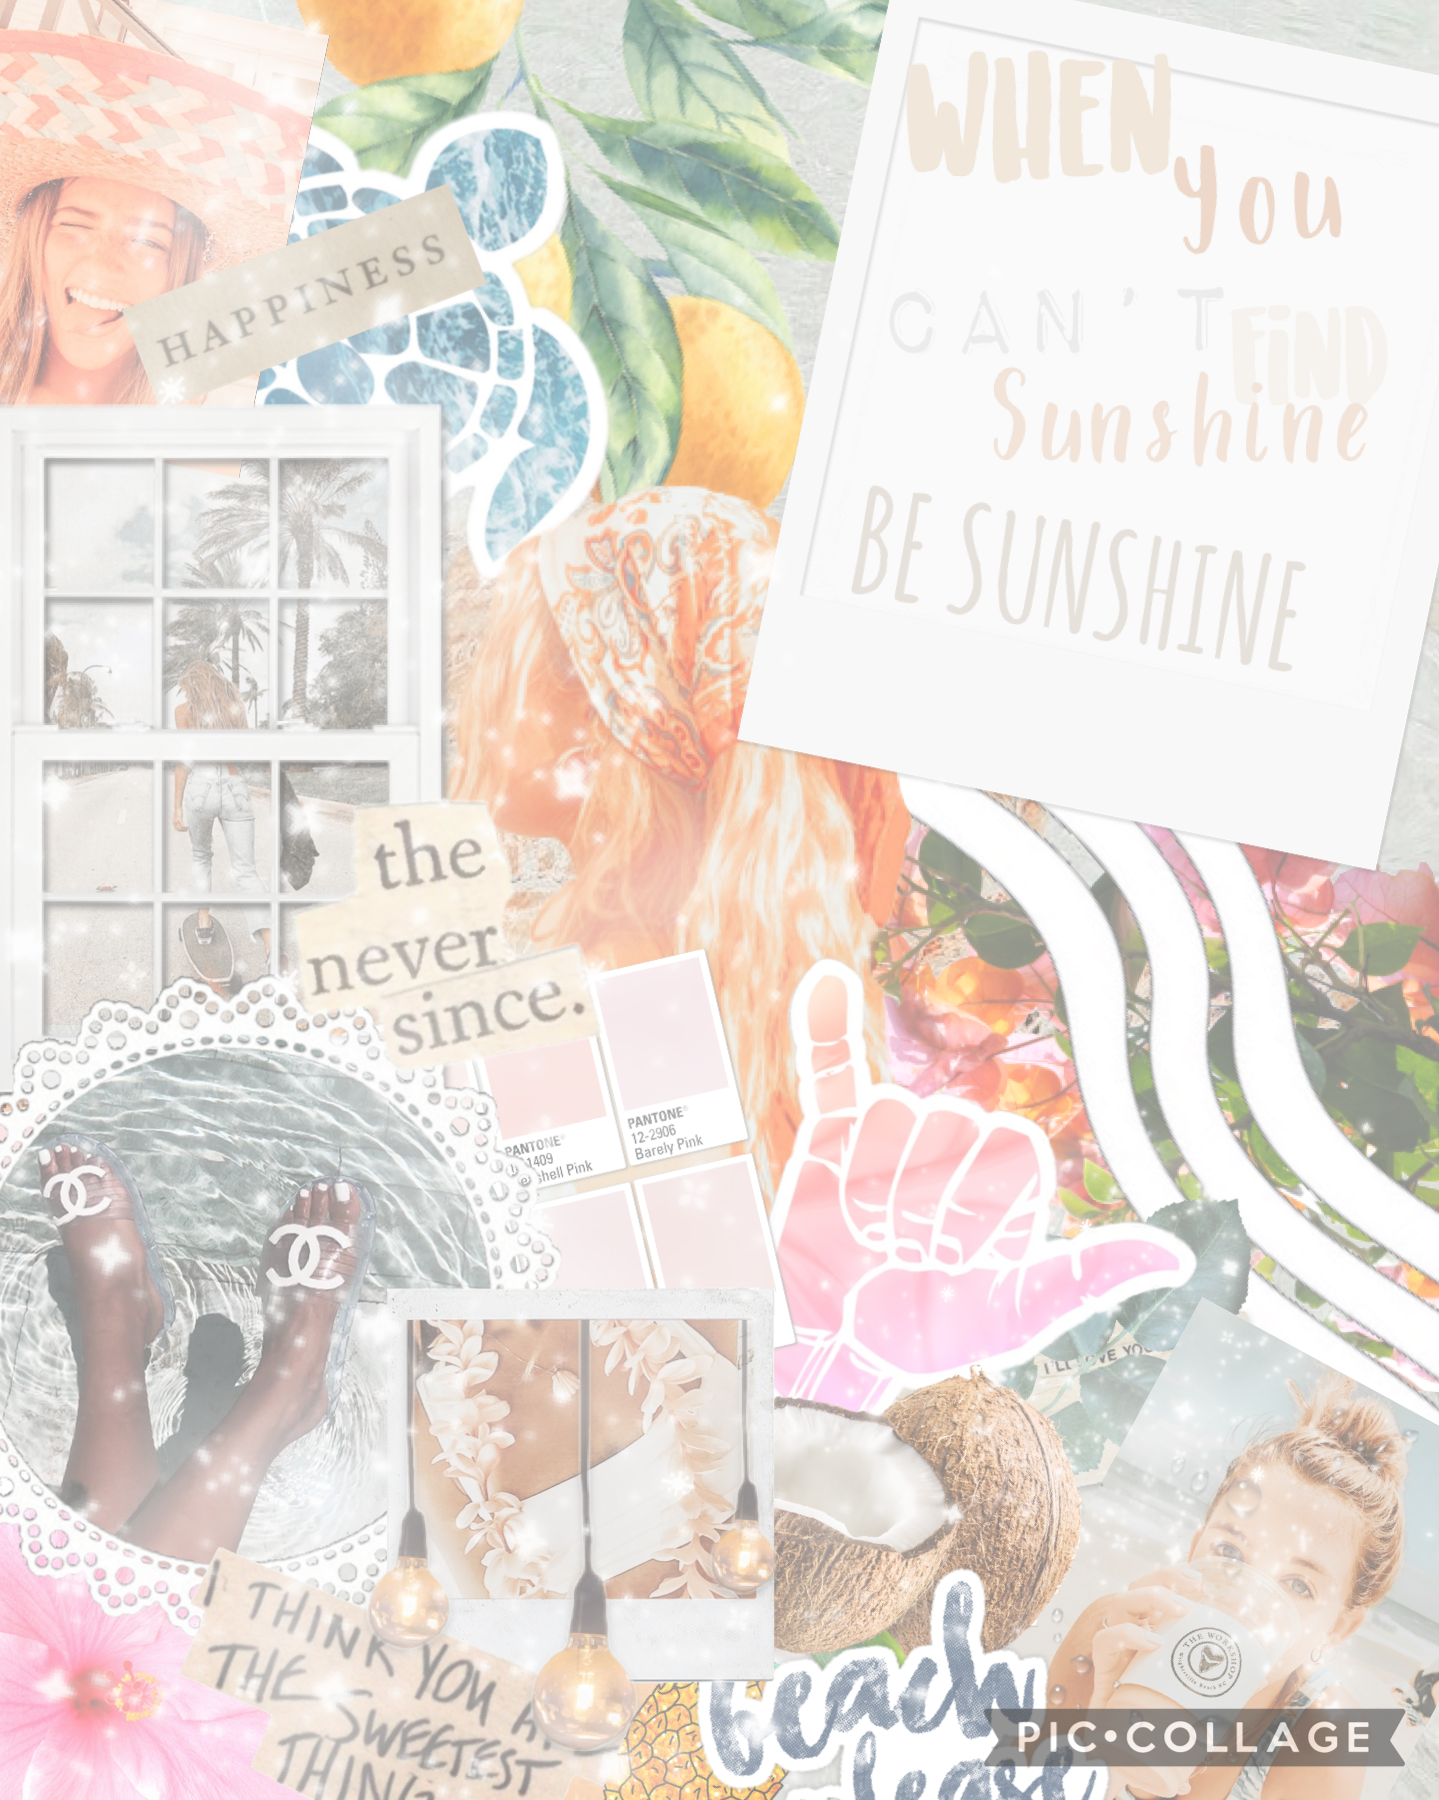 ⚡️tap⚡️
What are your thoughts? I’m not sure if I like it I feel like it looks really cluttered. I was going for a more complex aesthetic collage! Let me know more of what you want to see on my account! What type of collages, contests, forms, etc! I’m als